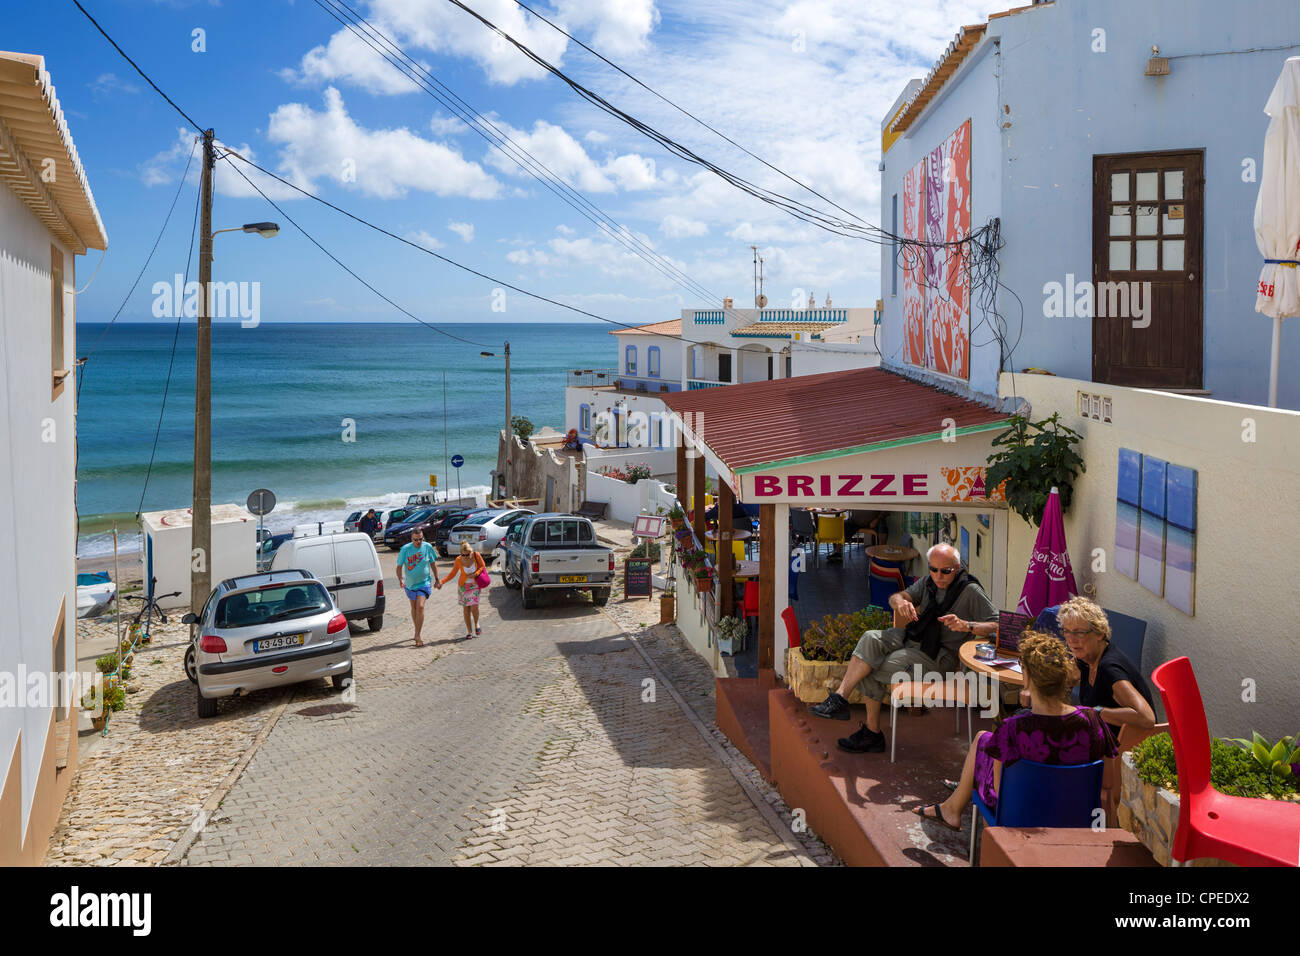 Terrace of cafe overlooking beach in small fishing village of Brugau on the coast between Sagres and Lagos, Algarve, Portugal Stock Photo